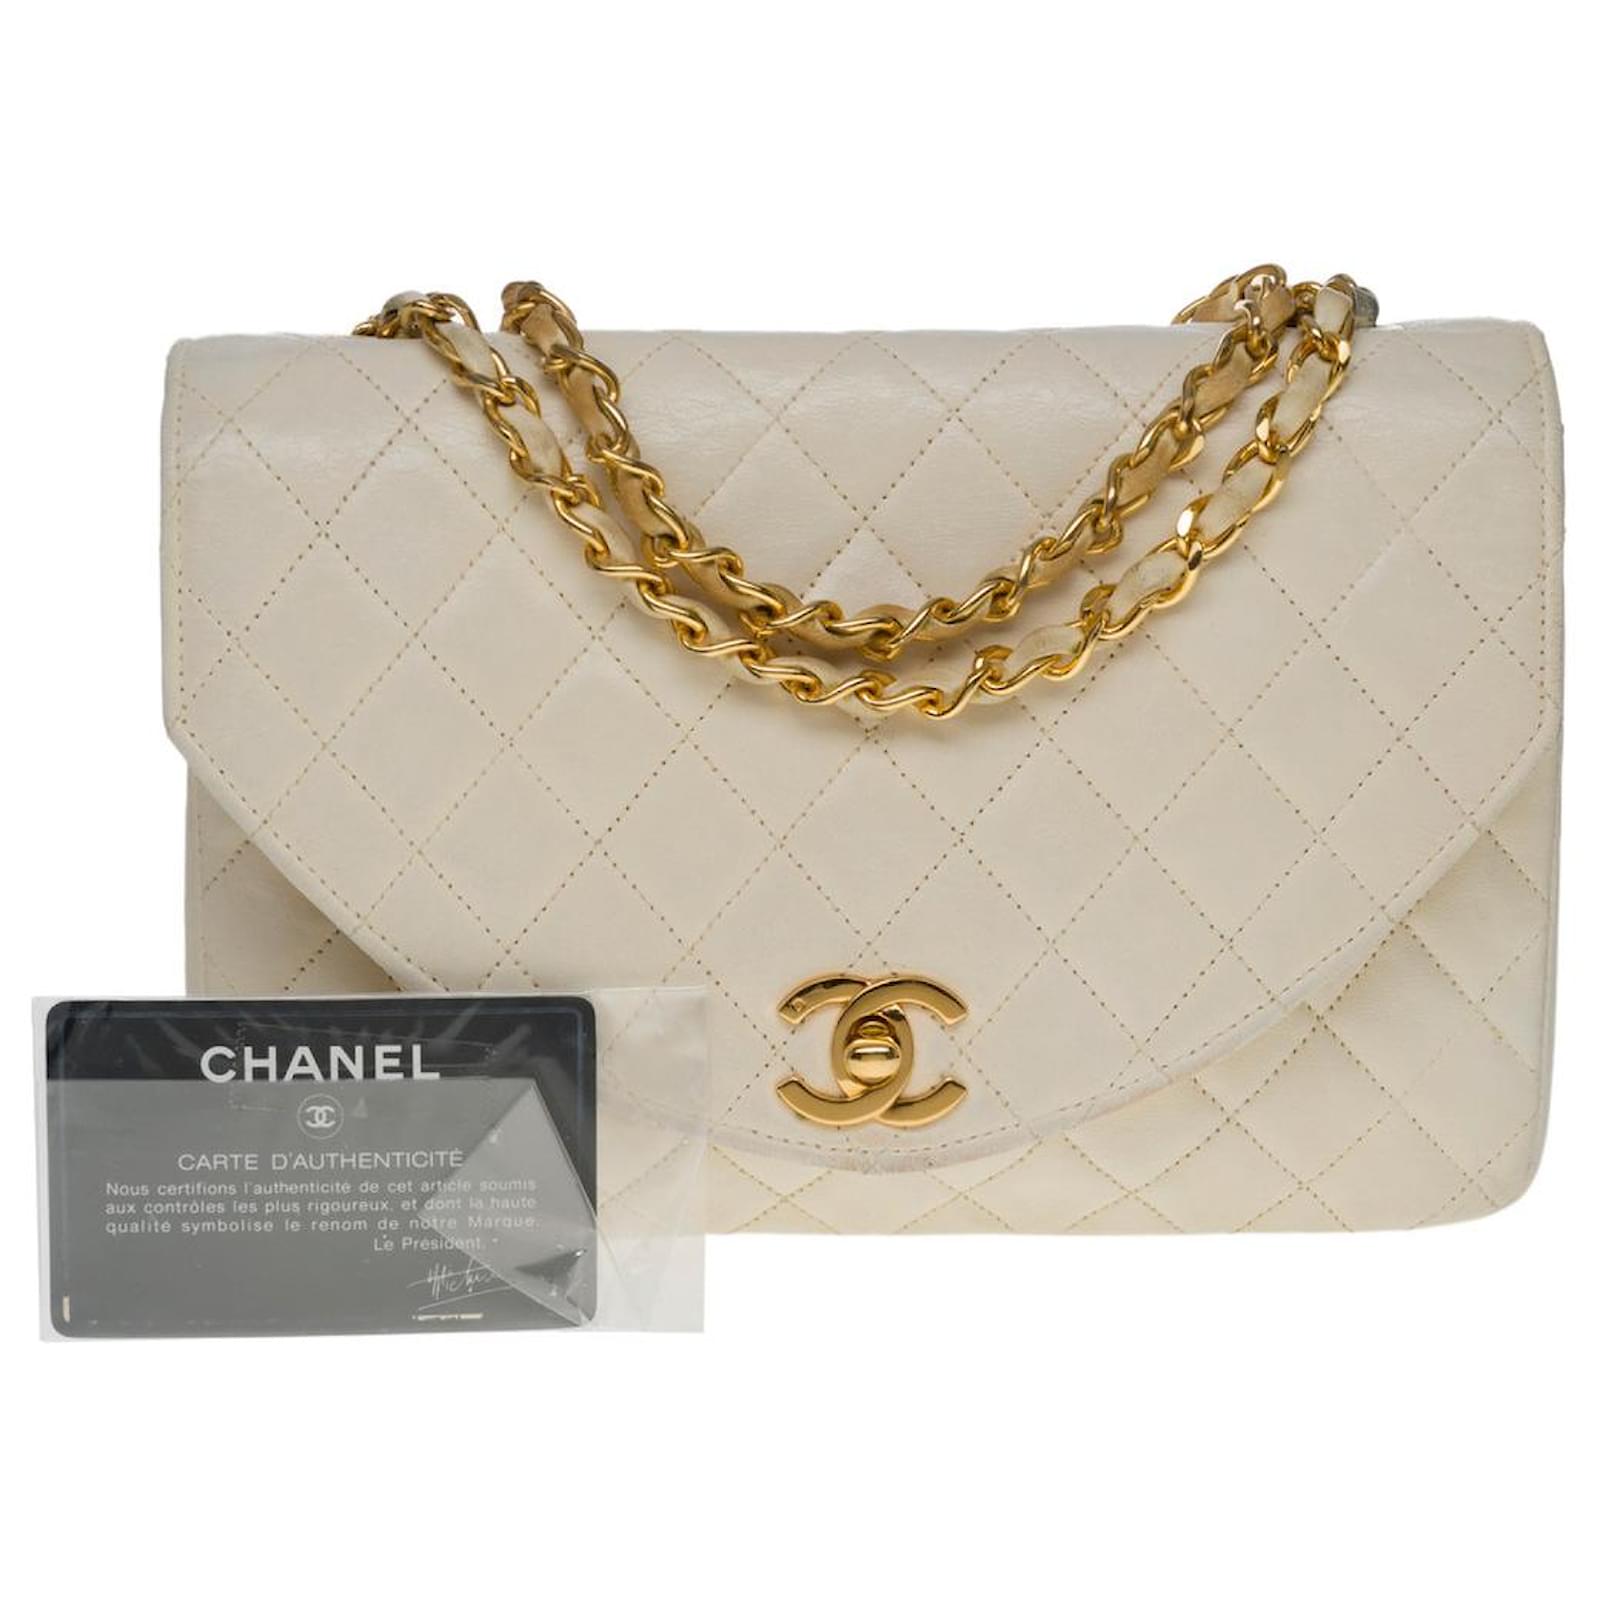 CHANEL CLASSIC FLAP BAG BROWN PATENT LEATHER AND RUTHENIUM HARDWARE